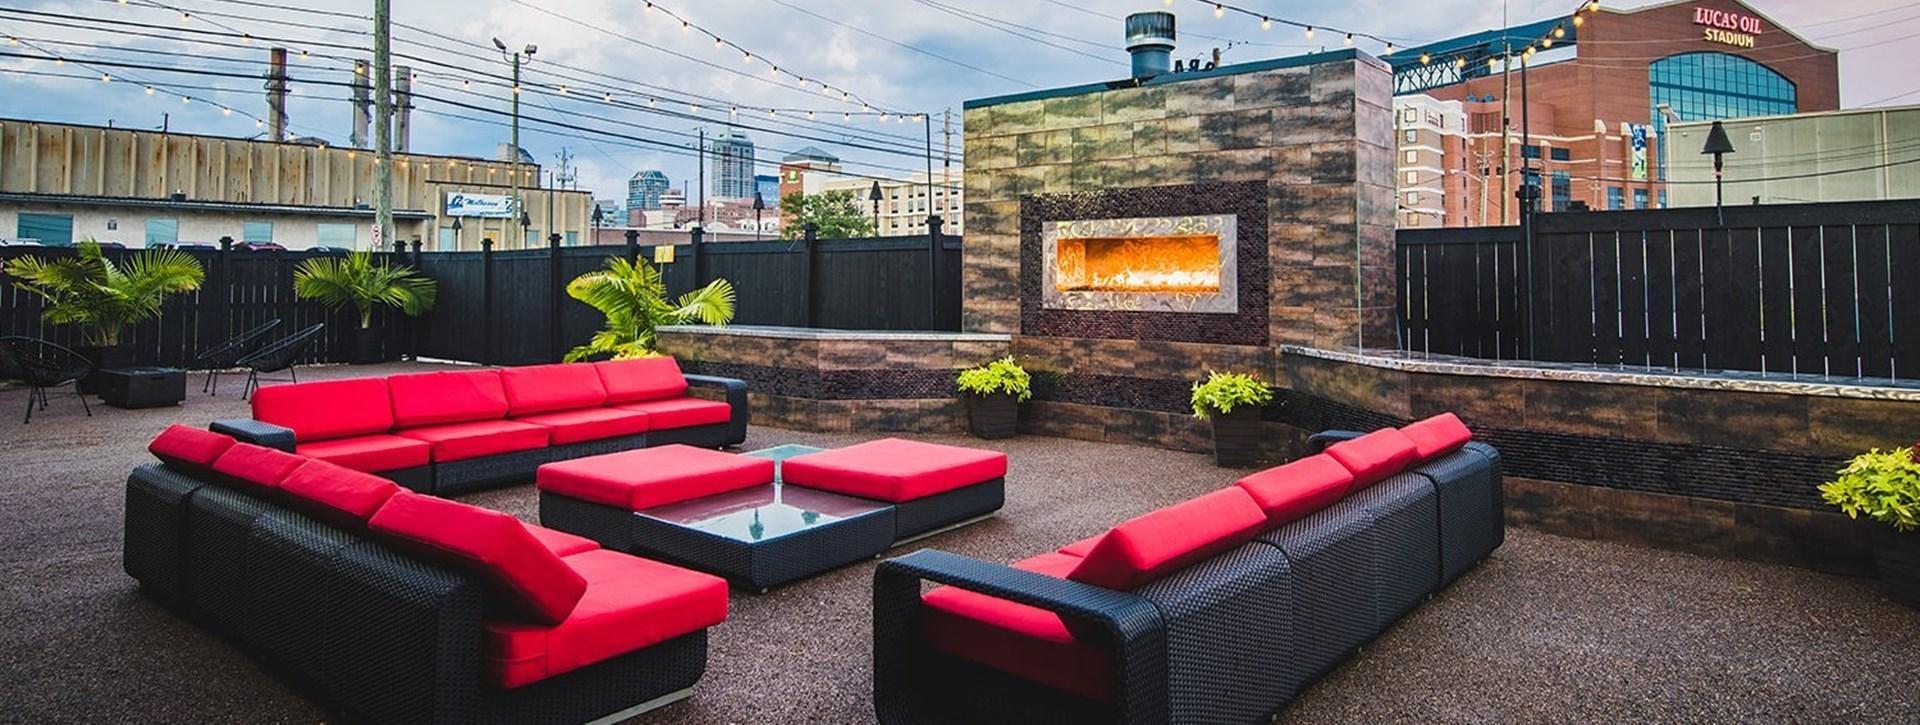 Outdoor Private Patio Downtown Indianapolis Skyline View